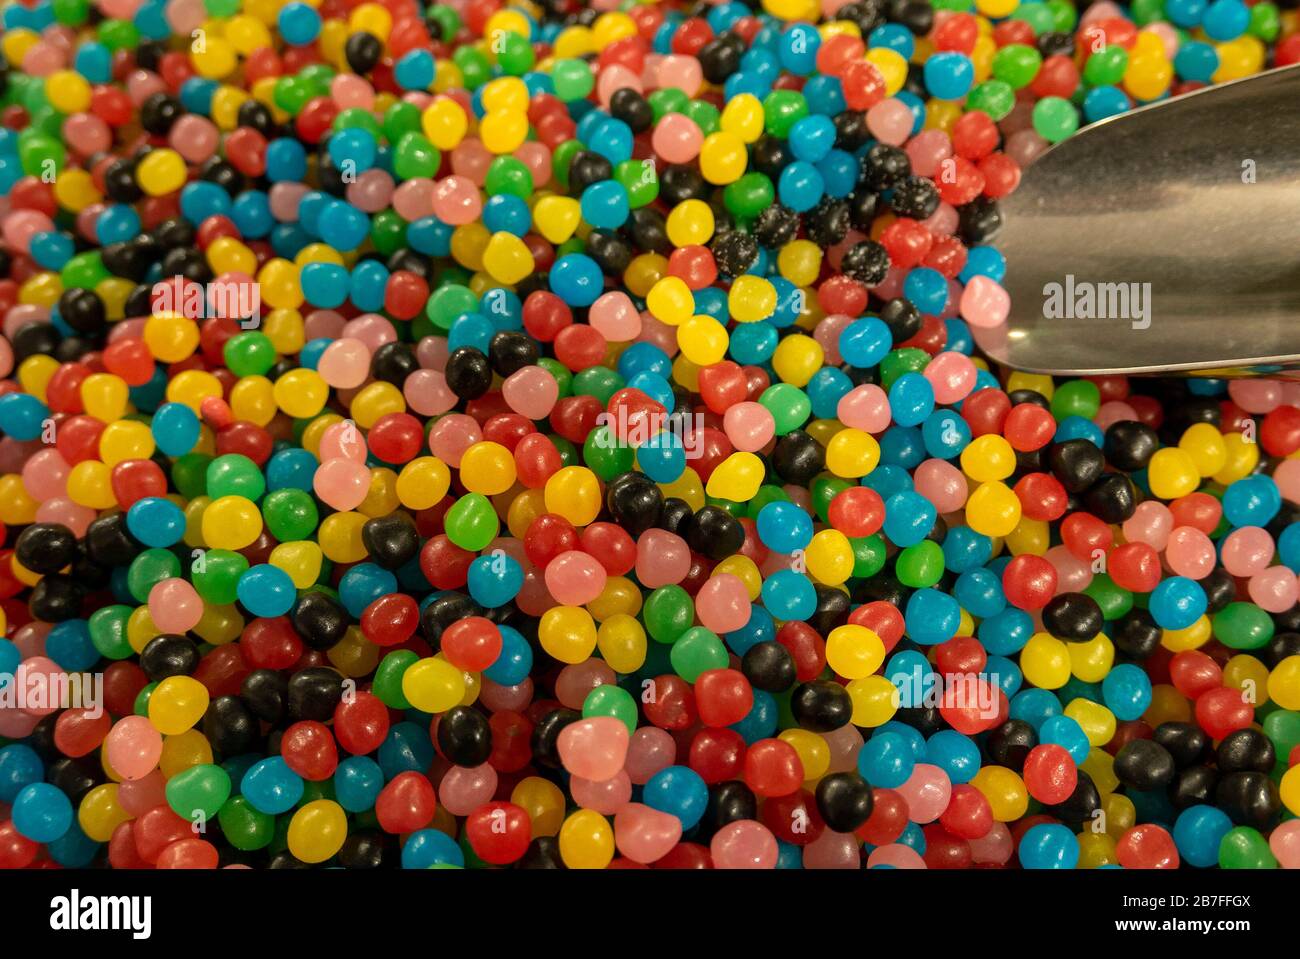 Colorful sweets Stock Photo